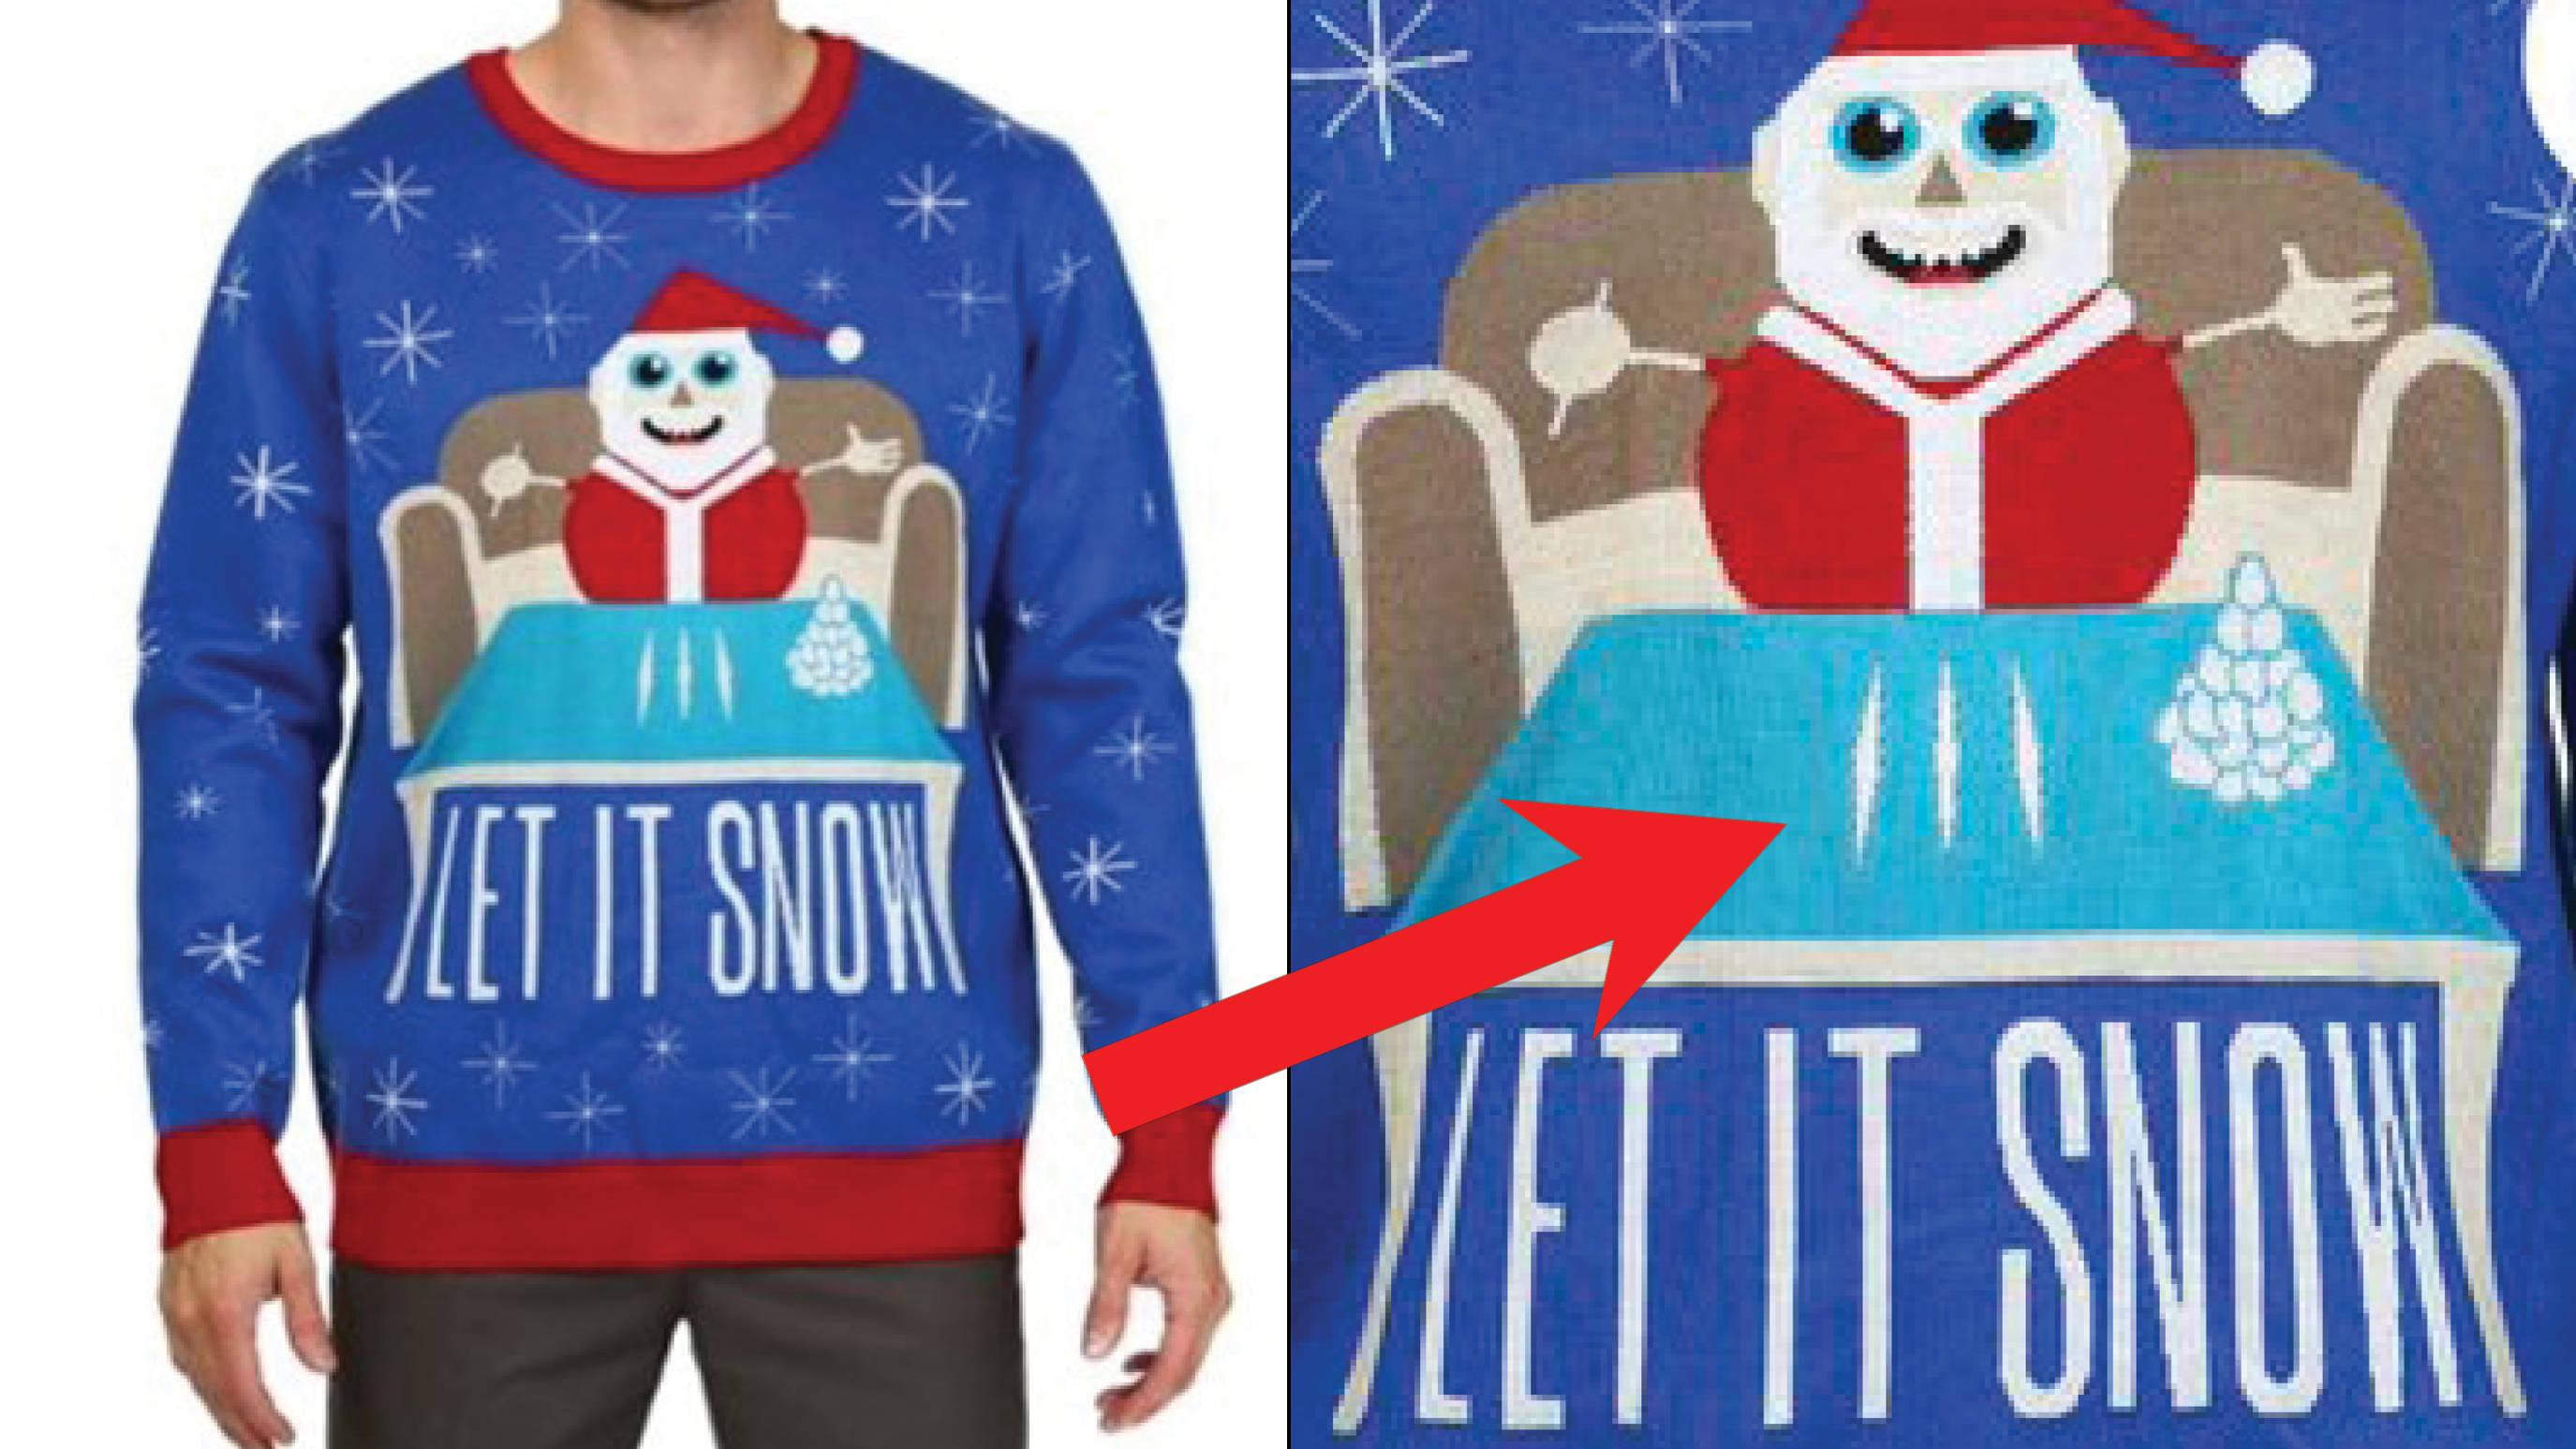 Walmart Apologises For Christmas Sweater Showing Santa With Lines